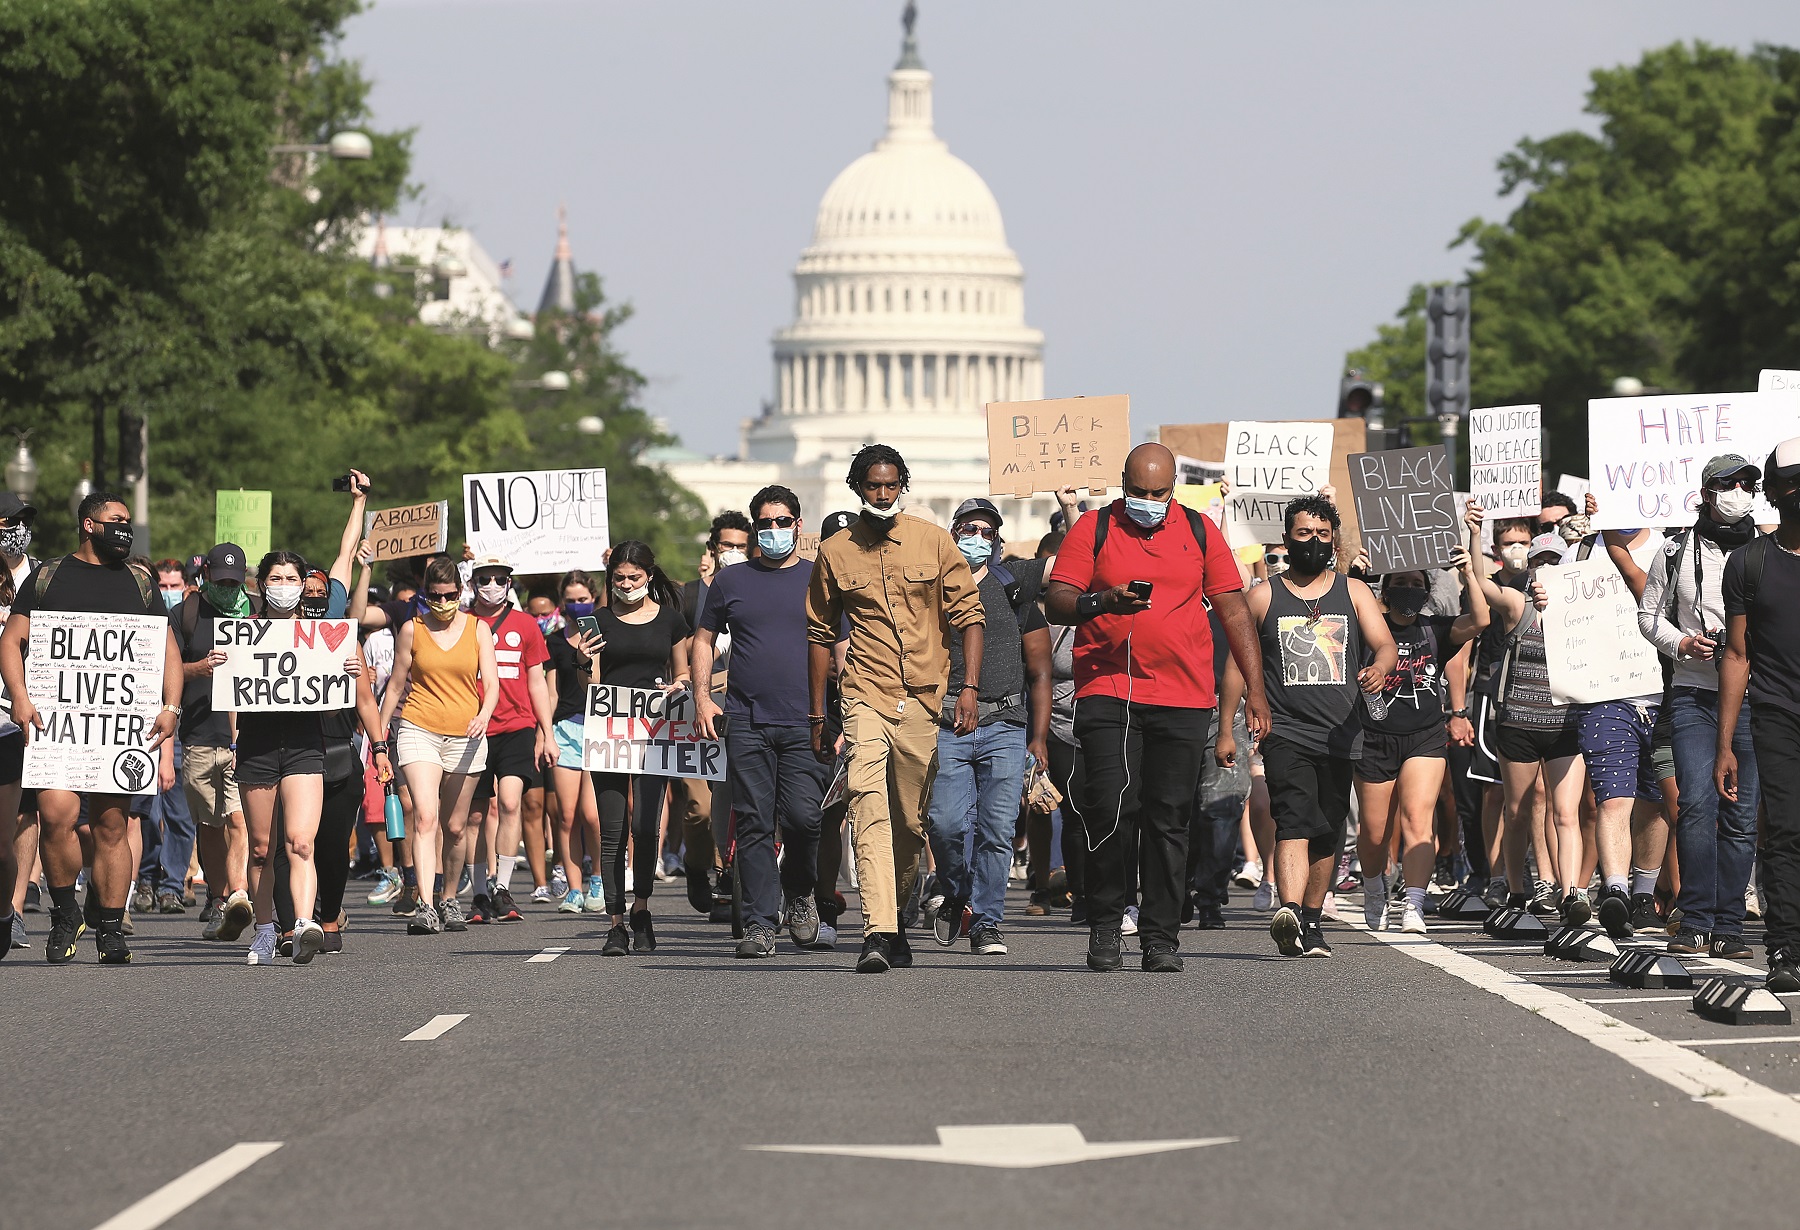 WASHINGTON, DC - JUNE 03: Demonstrators march down Pennsylvania Avenue near the Trump International Hotel during a protest against police brutality and the death of George Floyd, on June 3, 2020 in Washington, DC. Protests in cities throughout the country have been been held after the death of George Floyd, a black man who was killed in police custody in Minneapolis on May 25.  (Photo by Tasos Katopodis/Getty Images)